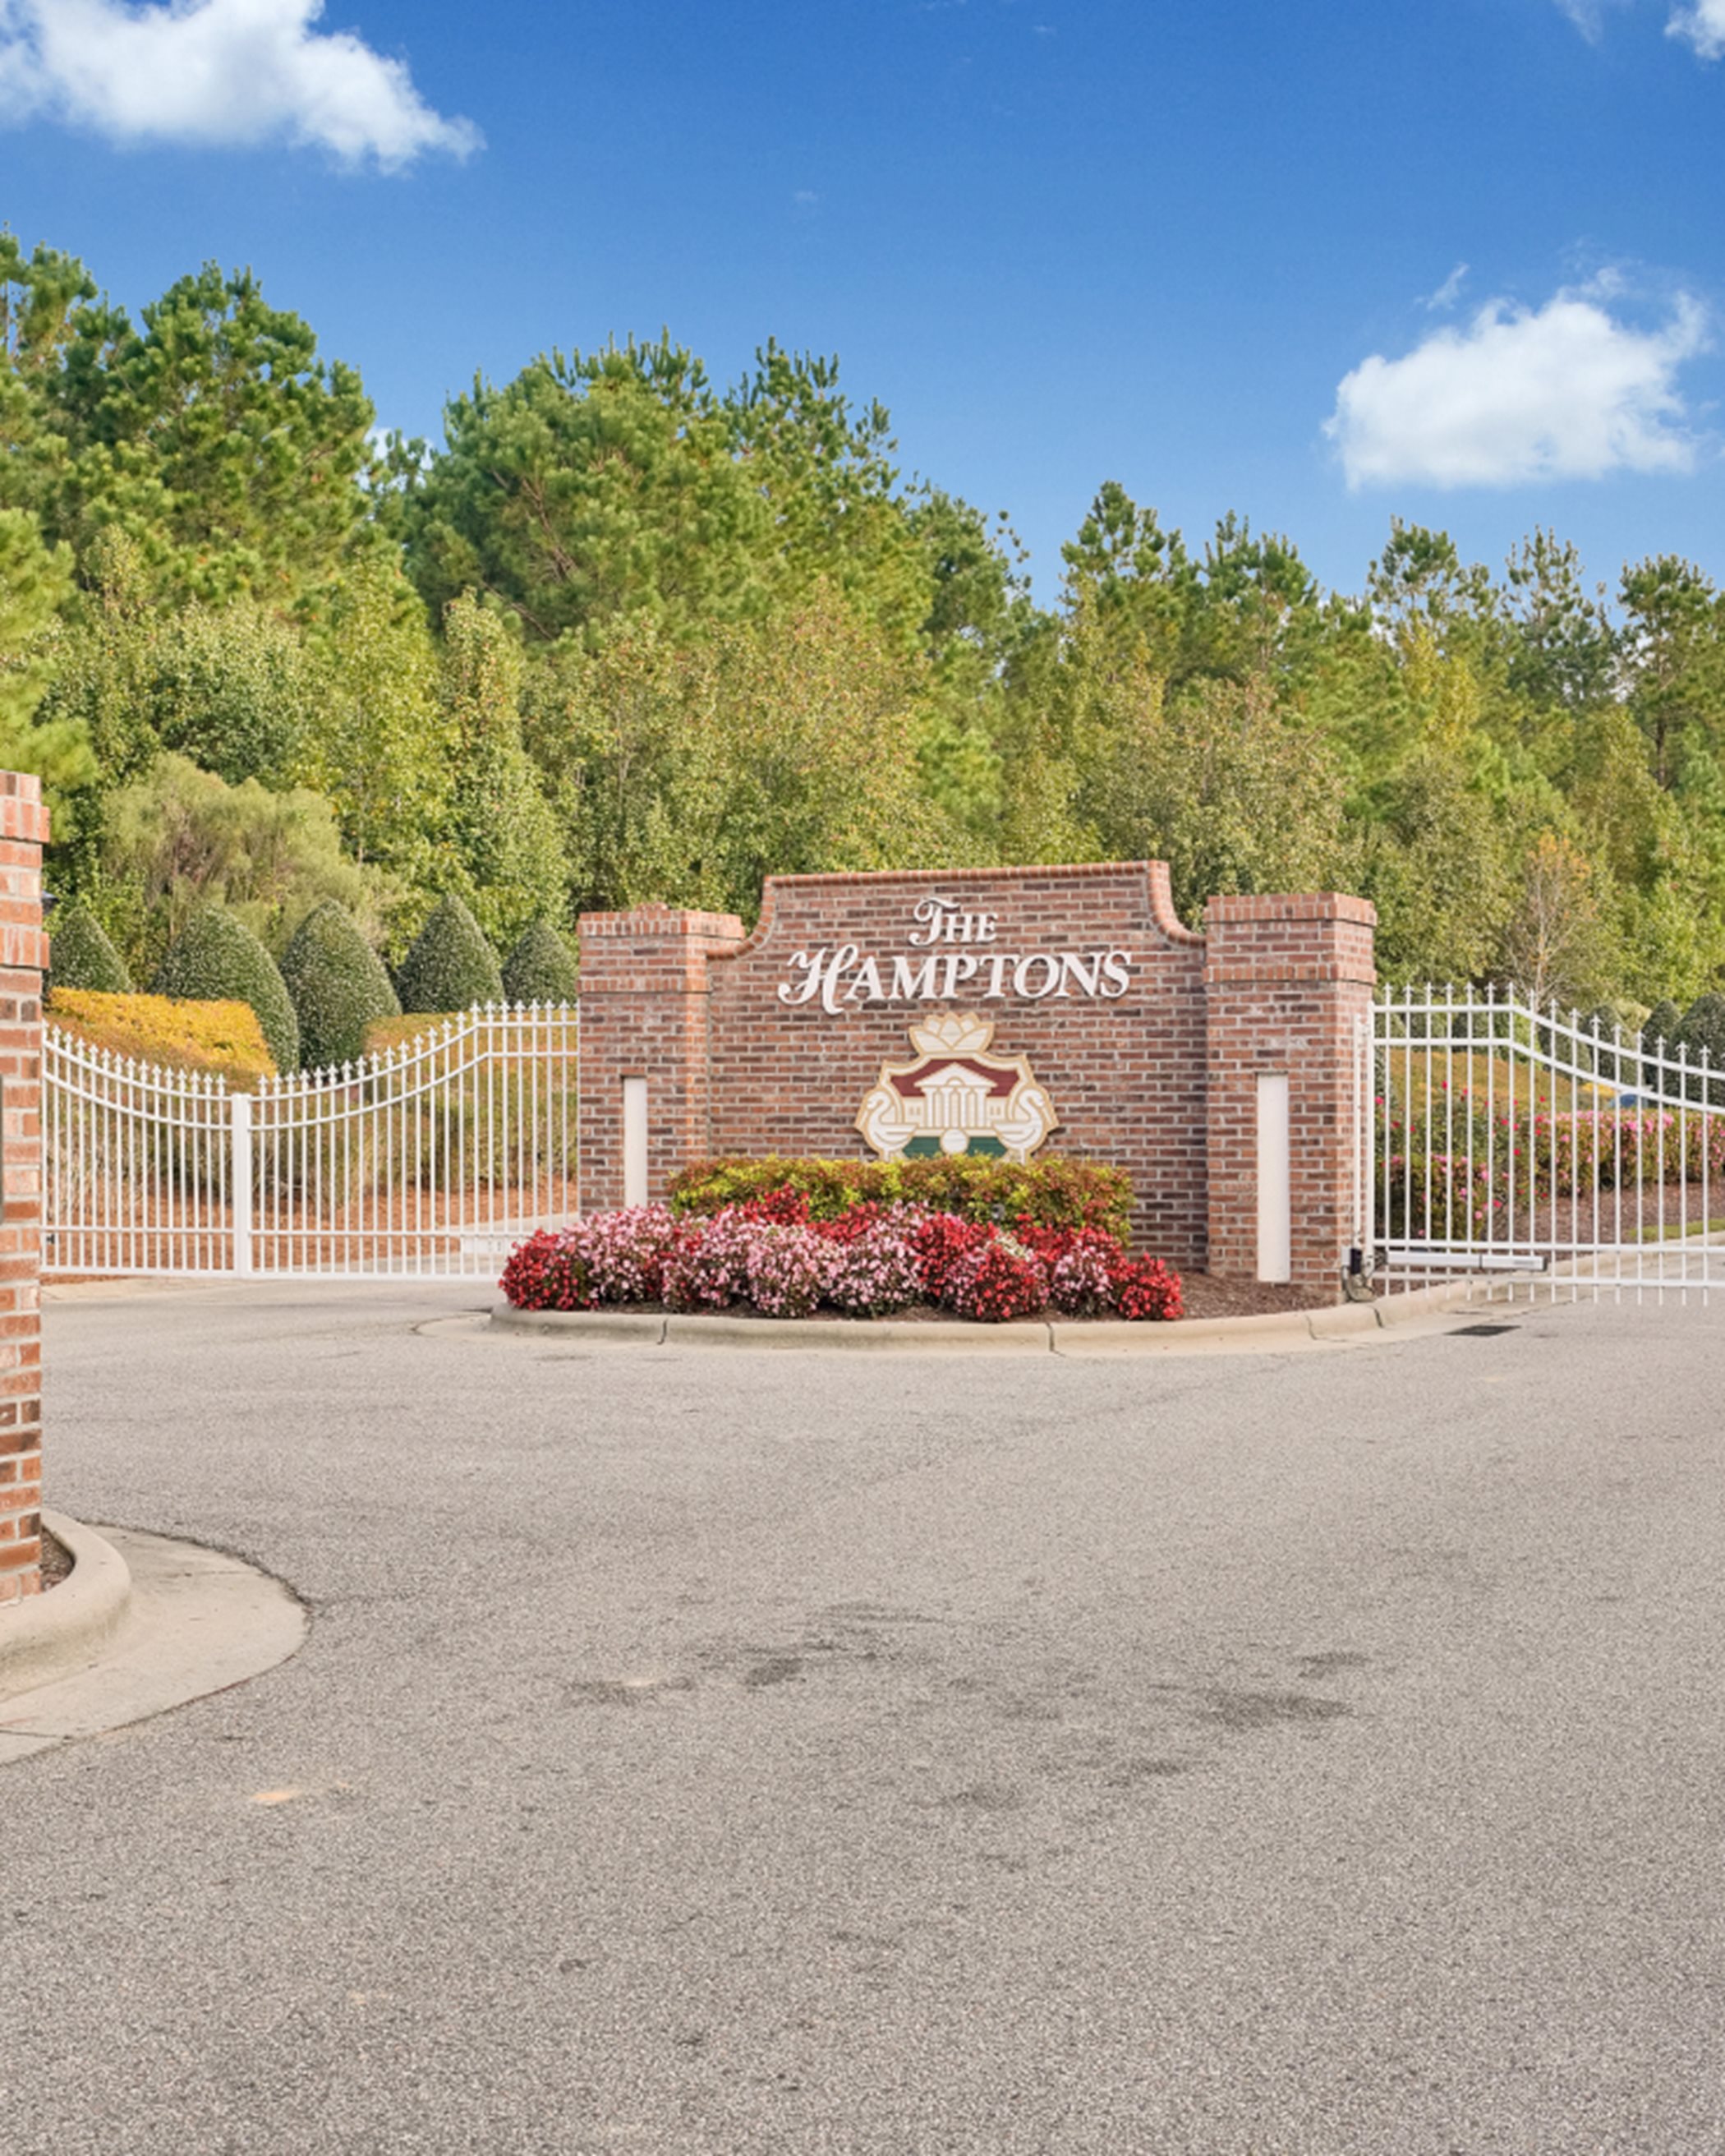 The Hamptons gated entrance